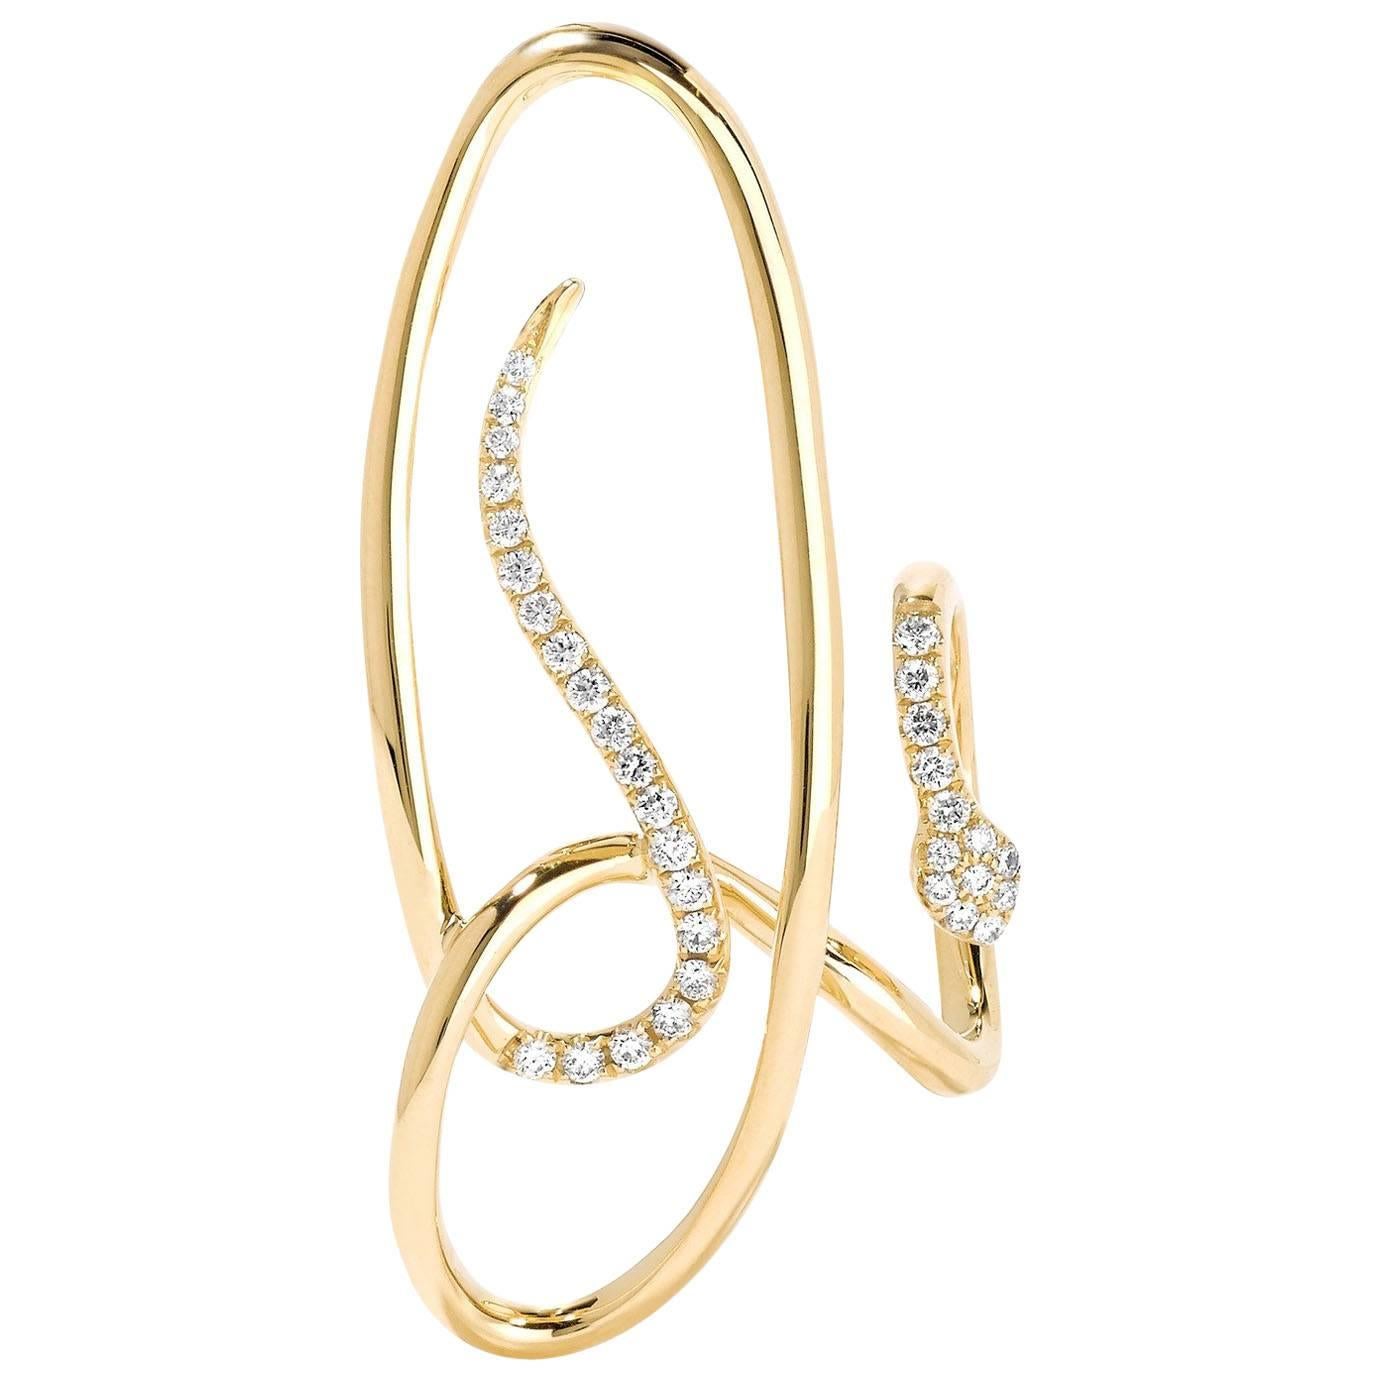 Yvonne Leon Contemporary Earring Snake in 18 Karat Yellow Gold and Diamonds